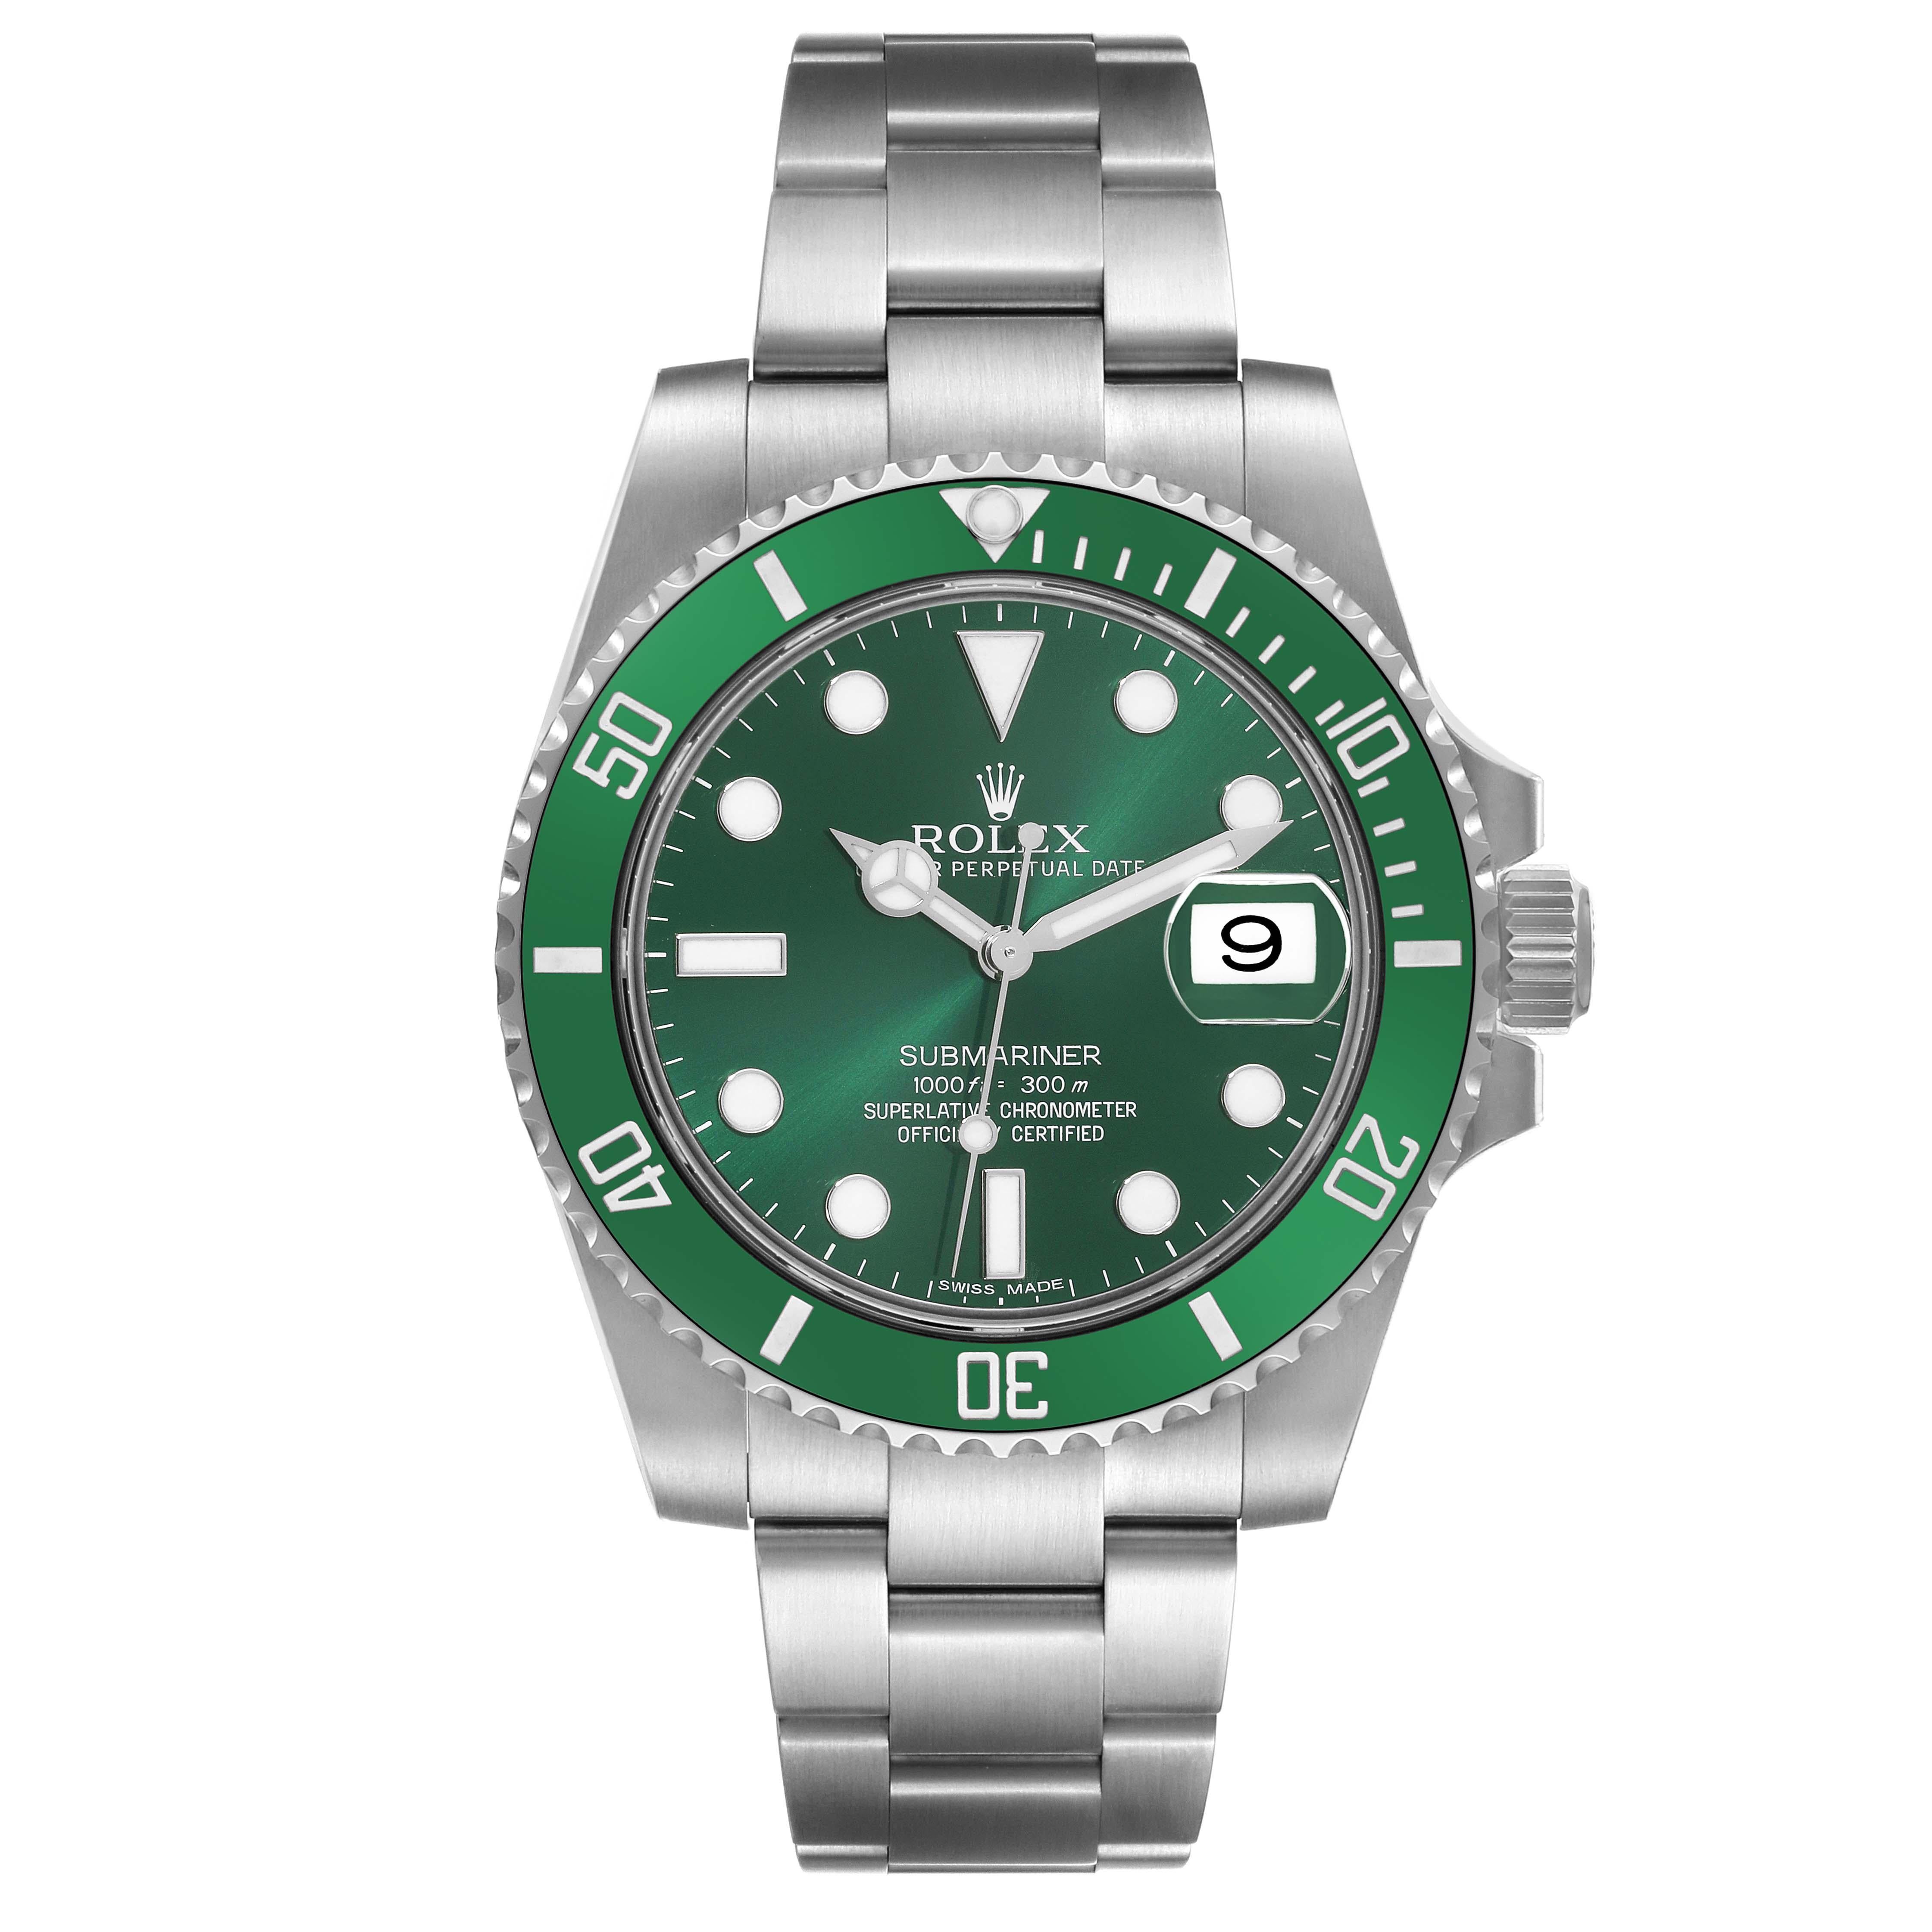 Rolex Submariner Hulk Green Dial Steel Mens Watch 116610LV. Officially certified chronometer automatic self-winding movement. Stainless steel oyster case 40 mm in diameter. Rolex logo on the crown. Special time-lapse unidirectional rotating green